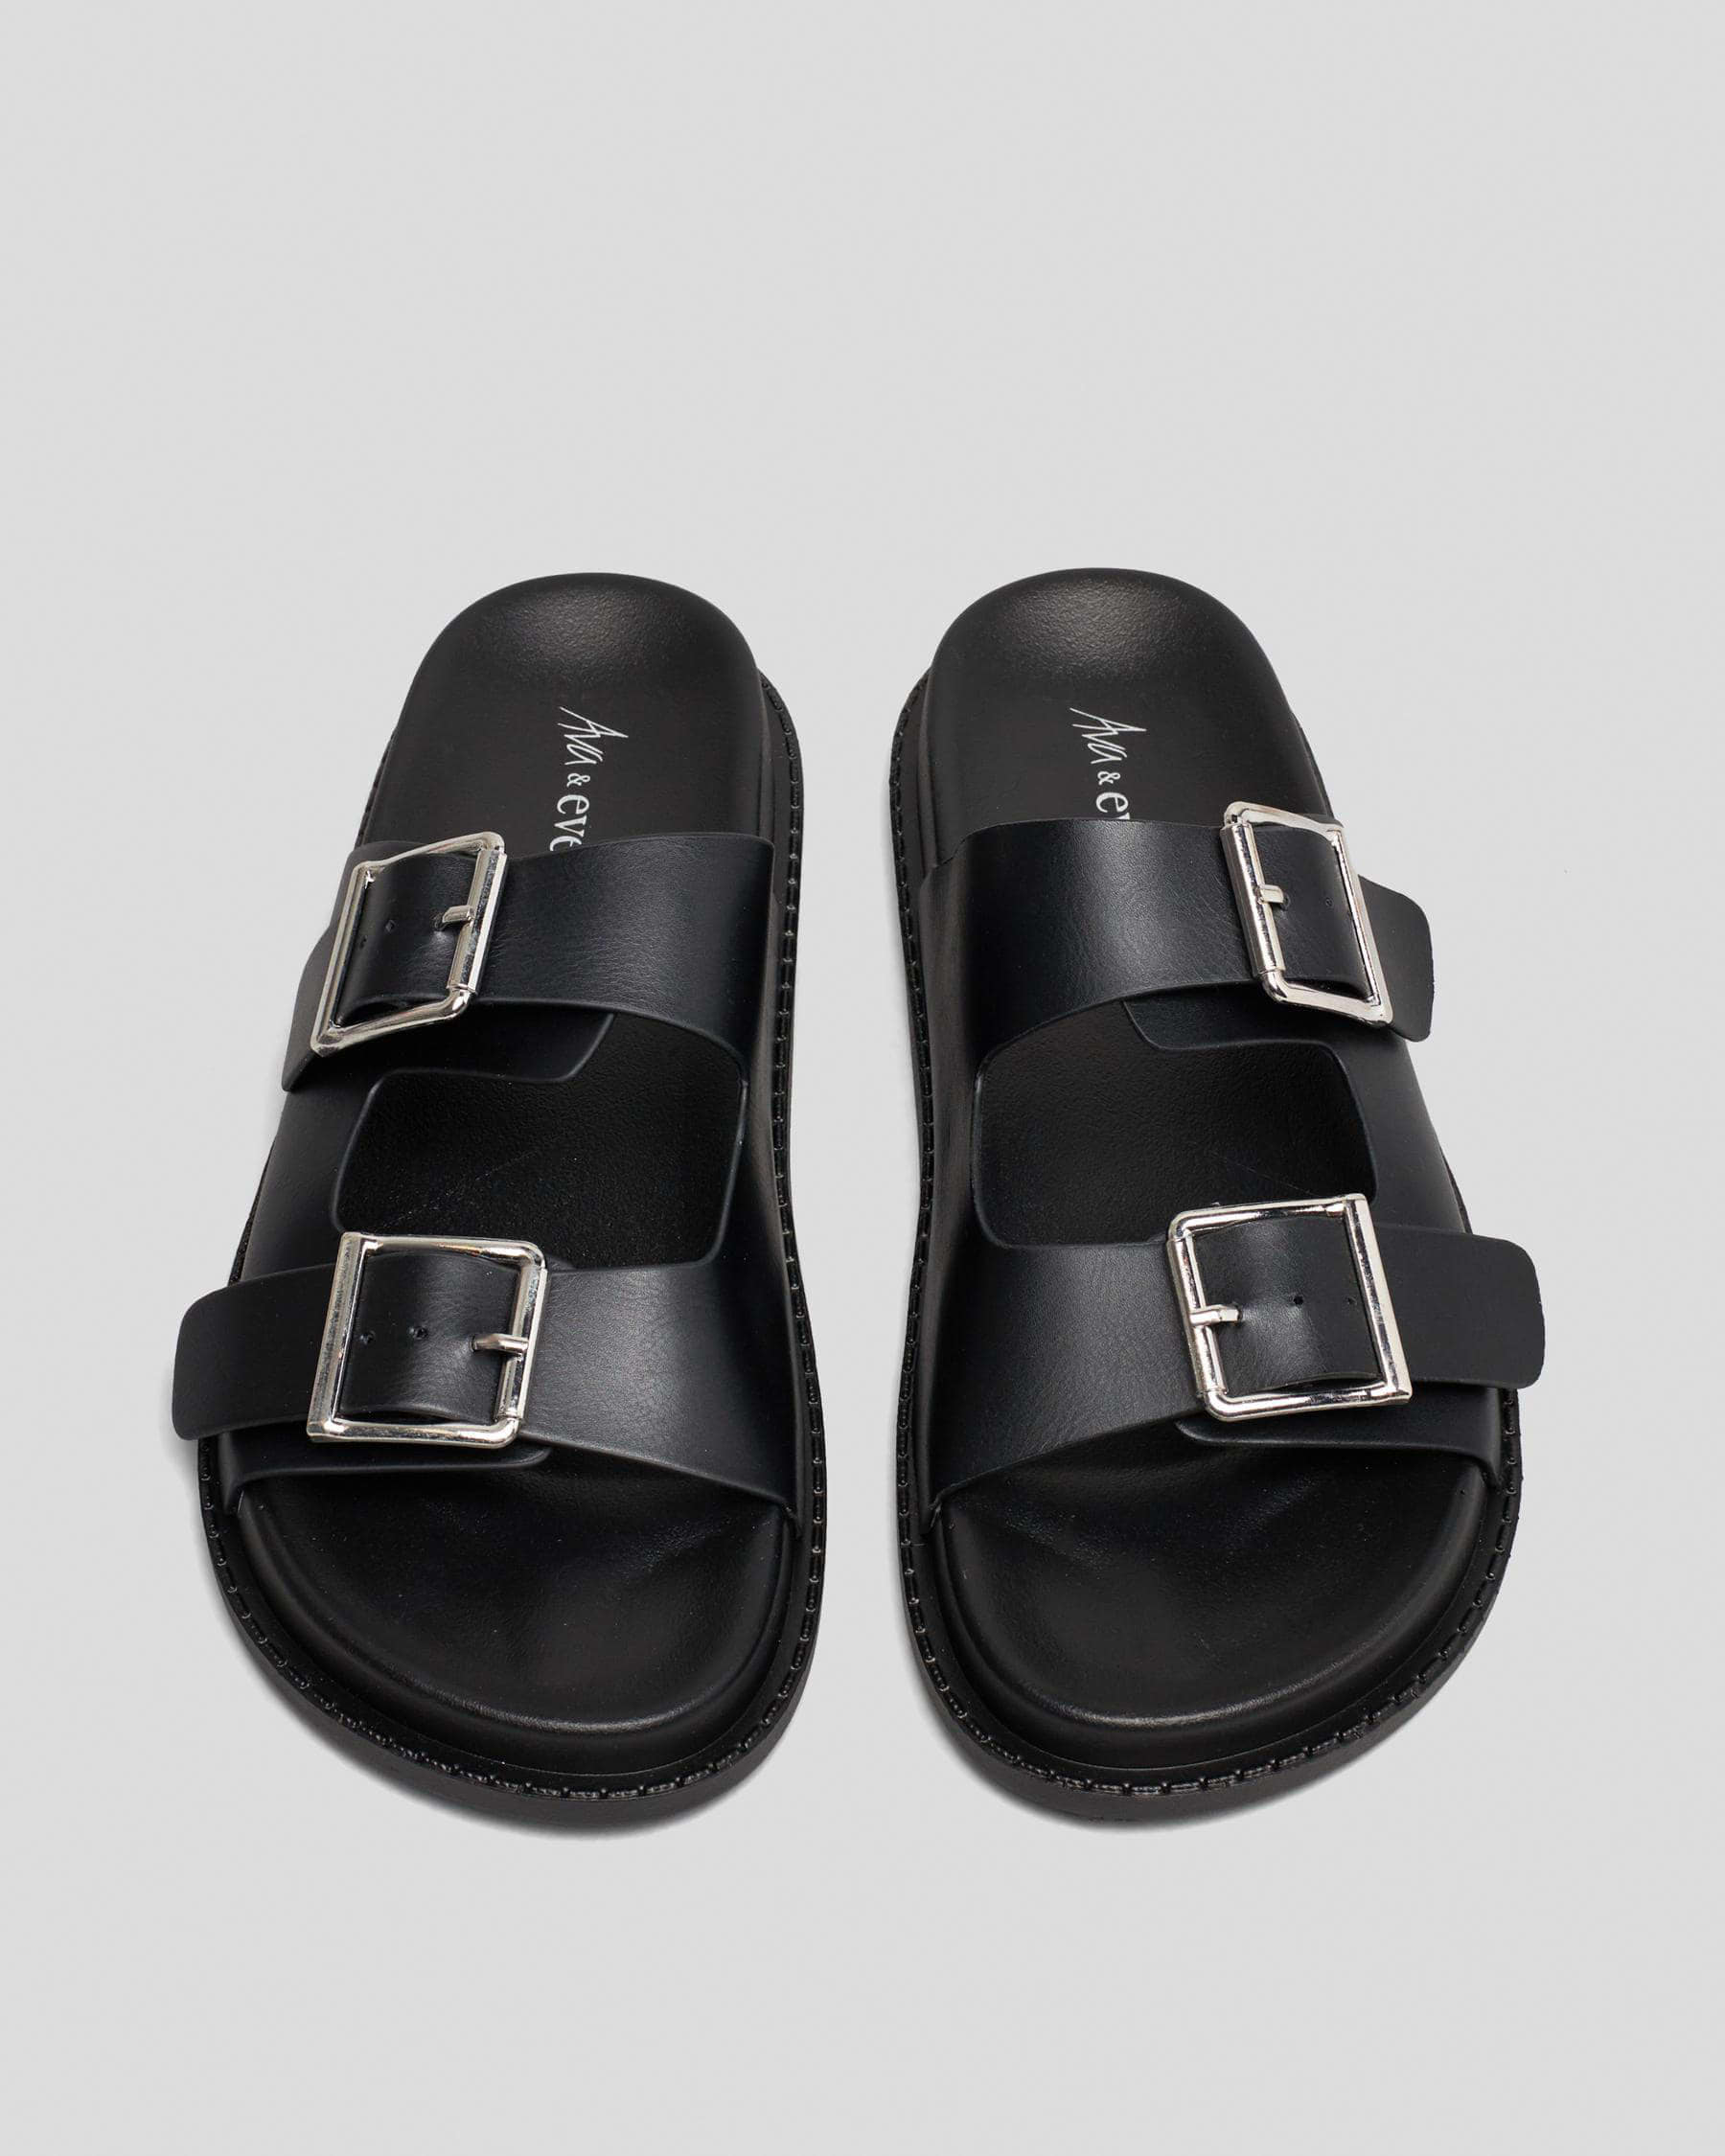 Ava And Ever Alice Slide Sandals In Black/black - FREE* Shipping & Easy ...